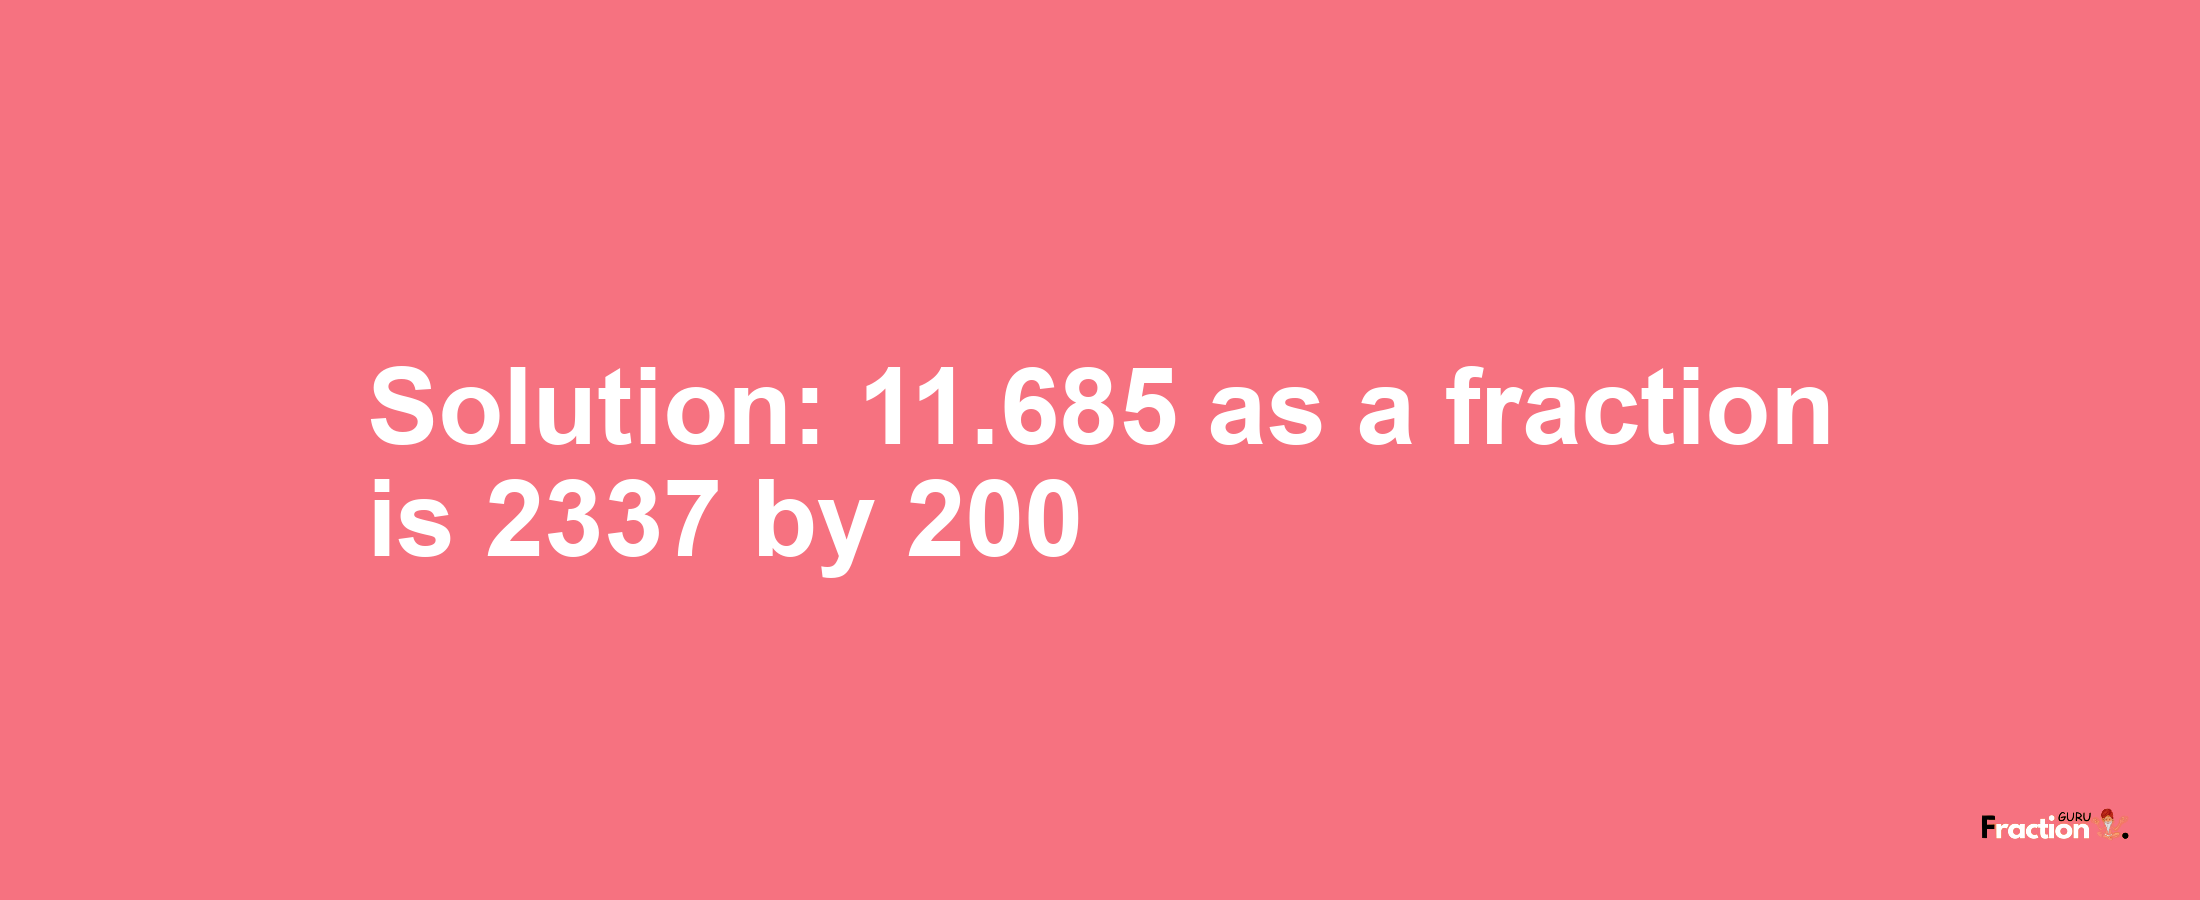 Solution:11.685 as a fraction is 2337/200